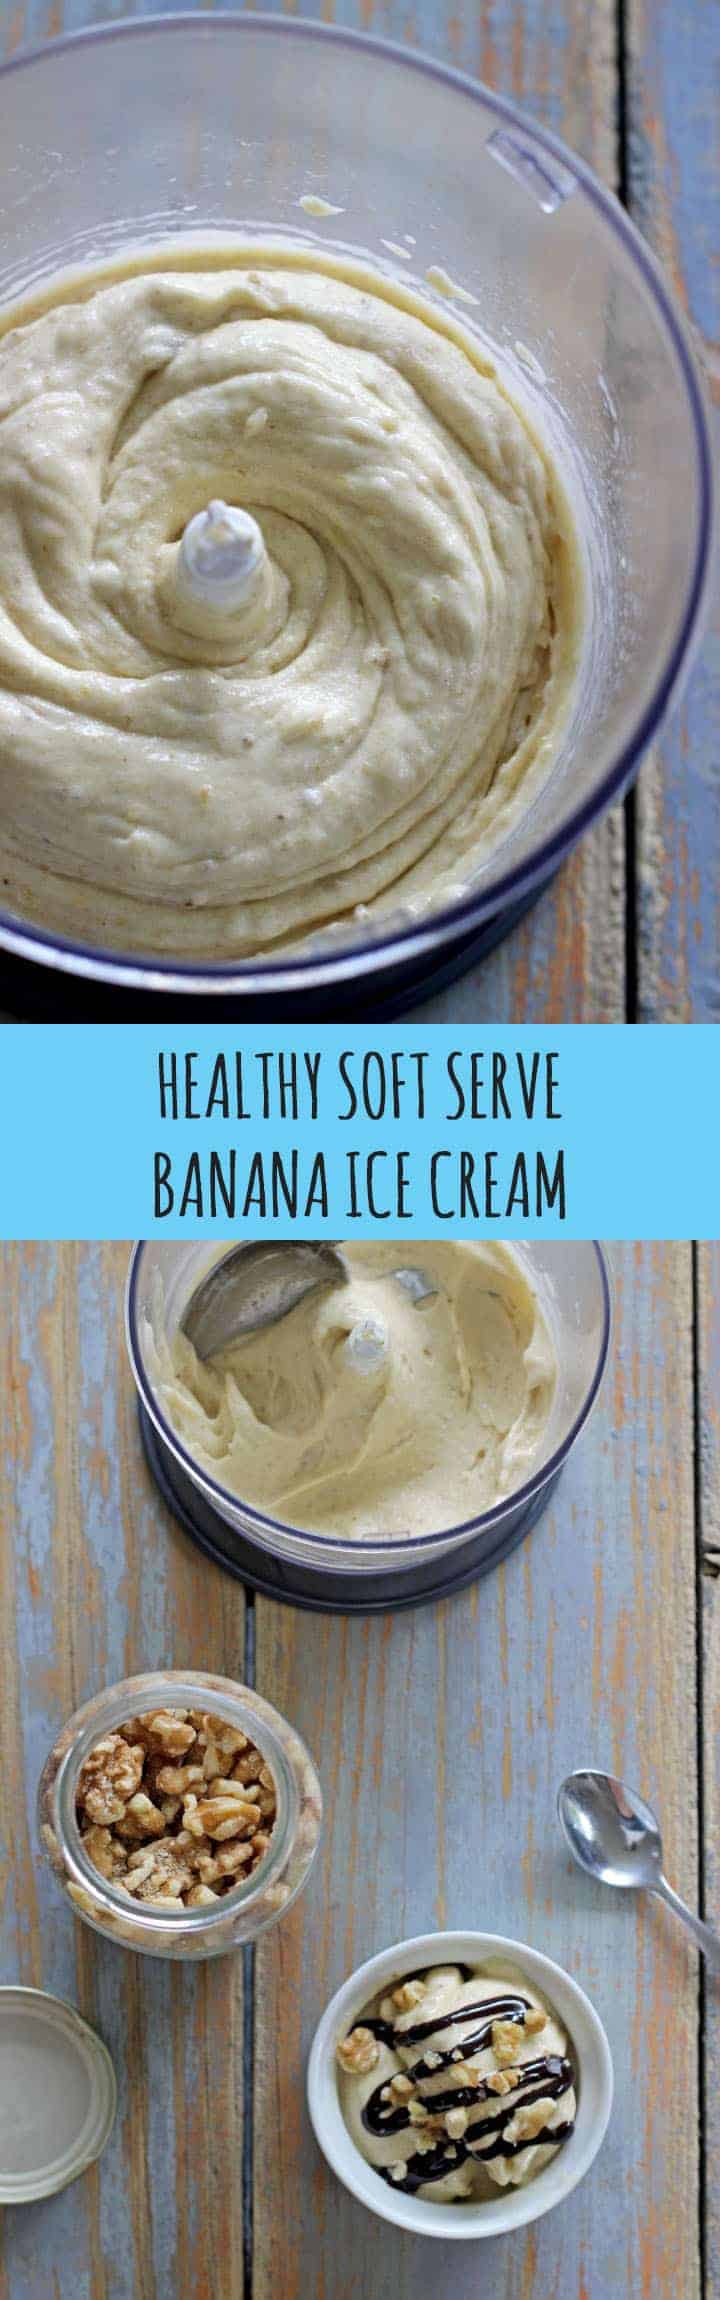 Frozen bananas are all that it takes to make this creamy but healthy banana ice cream! | thekiwicountrygirl.com